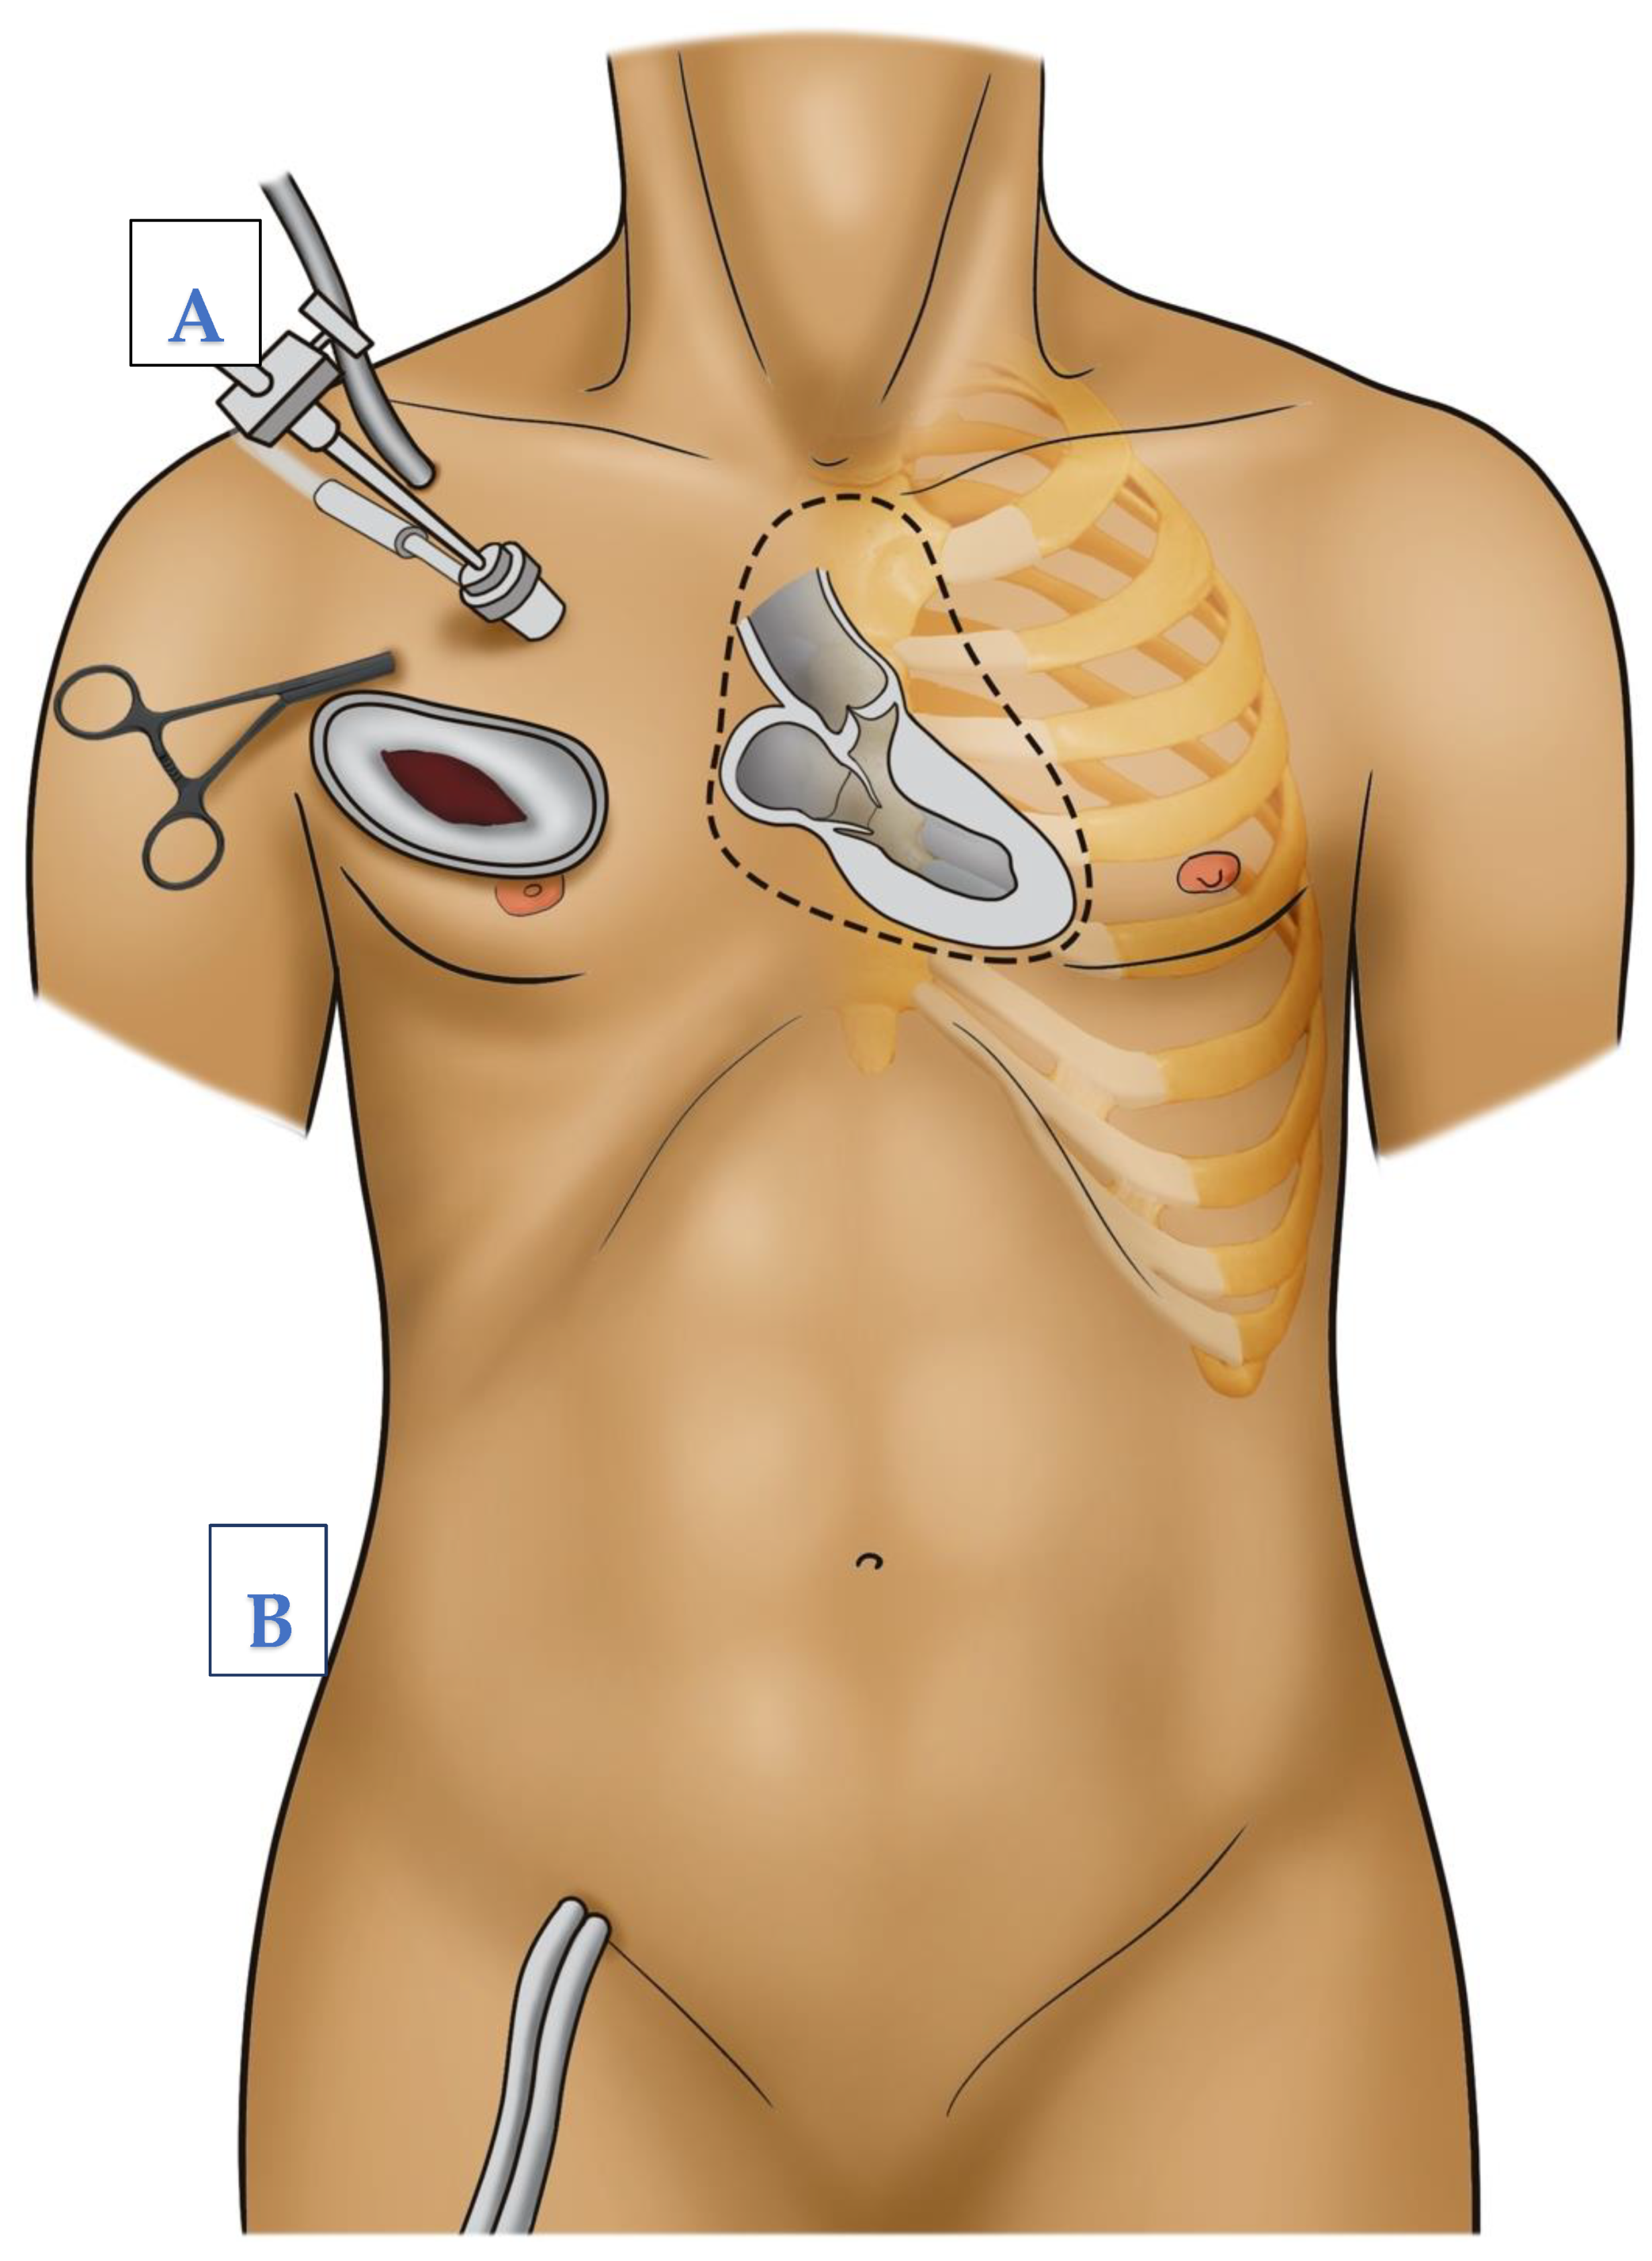 PDF) Percutaneous Venous Cannulation for Minimally Invasive Cardiac  Surgery: The Safest and Effective Technique Described Step-by-Step